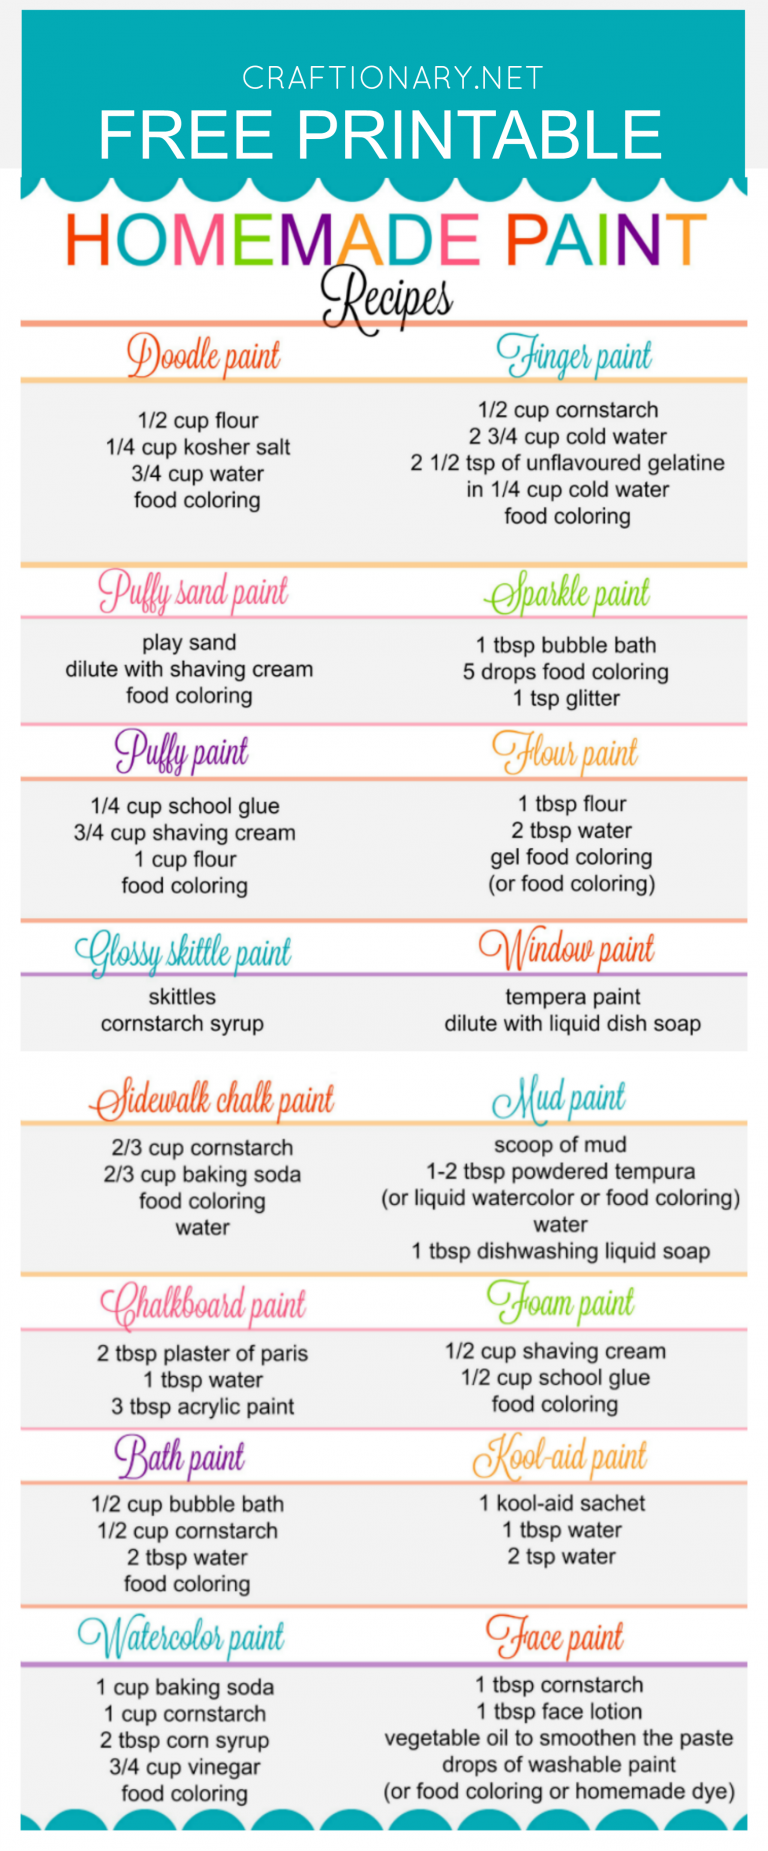 Homemade paint recipes free printable to create your own paints using simple ingredients